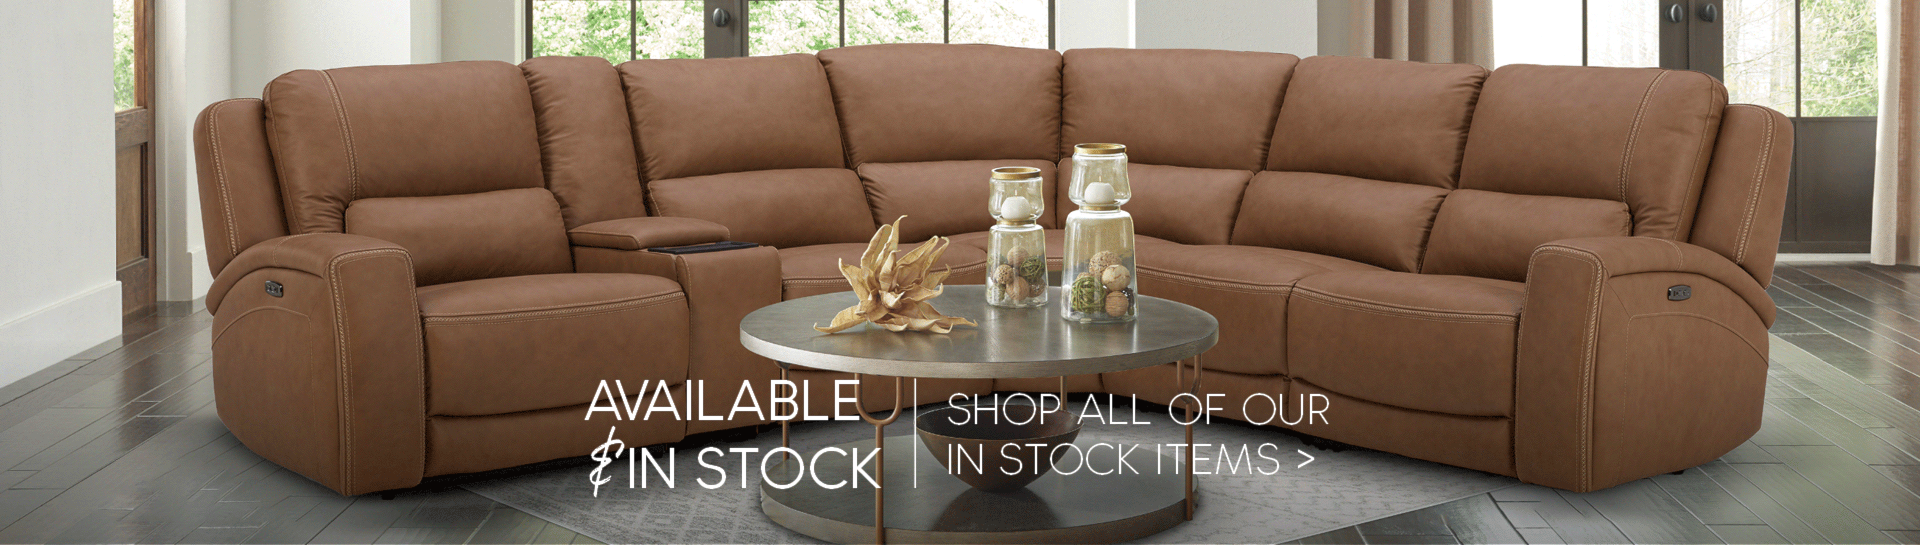 shop all in-stock